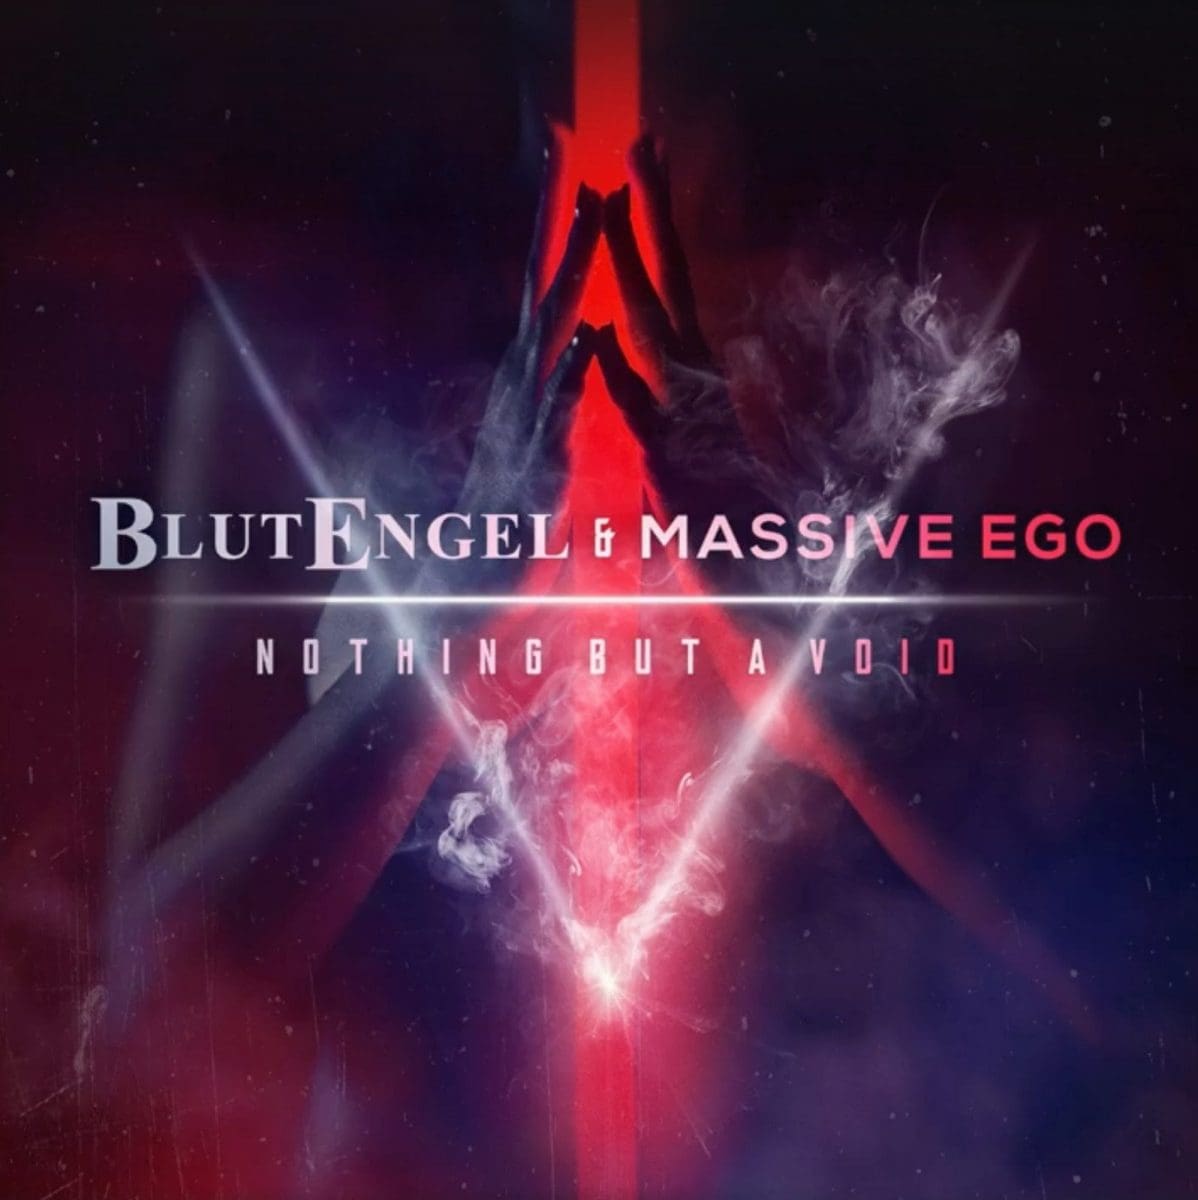 Blutengel singer Chris Pohl and Massive Ego frontman release joined EP 'Nothing but a Void'